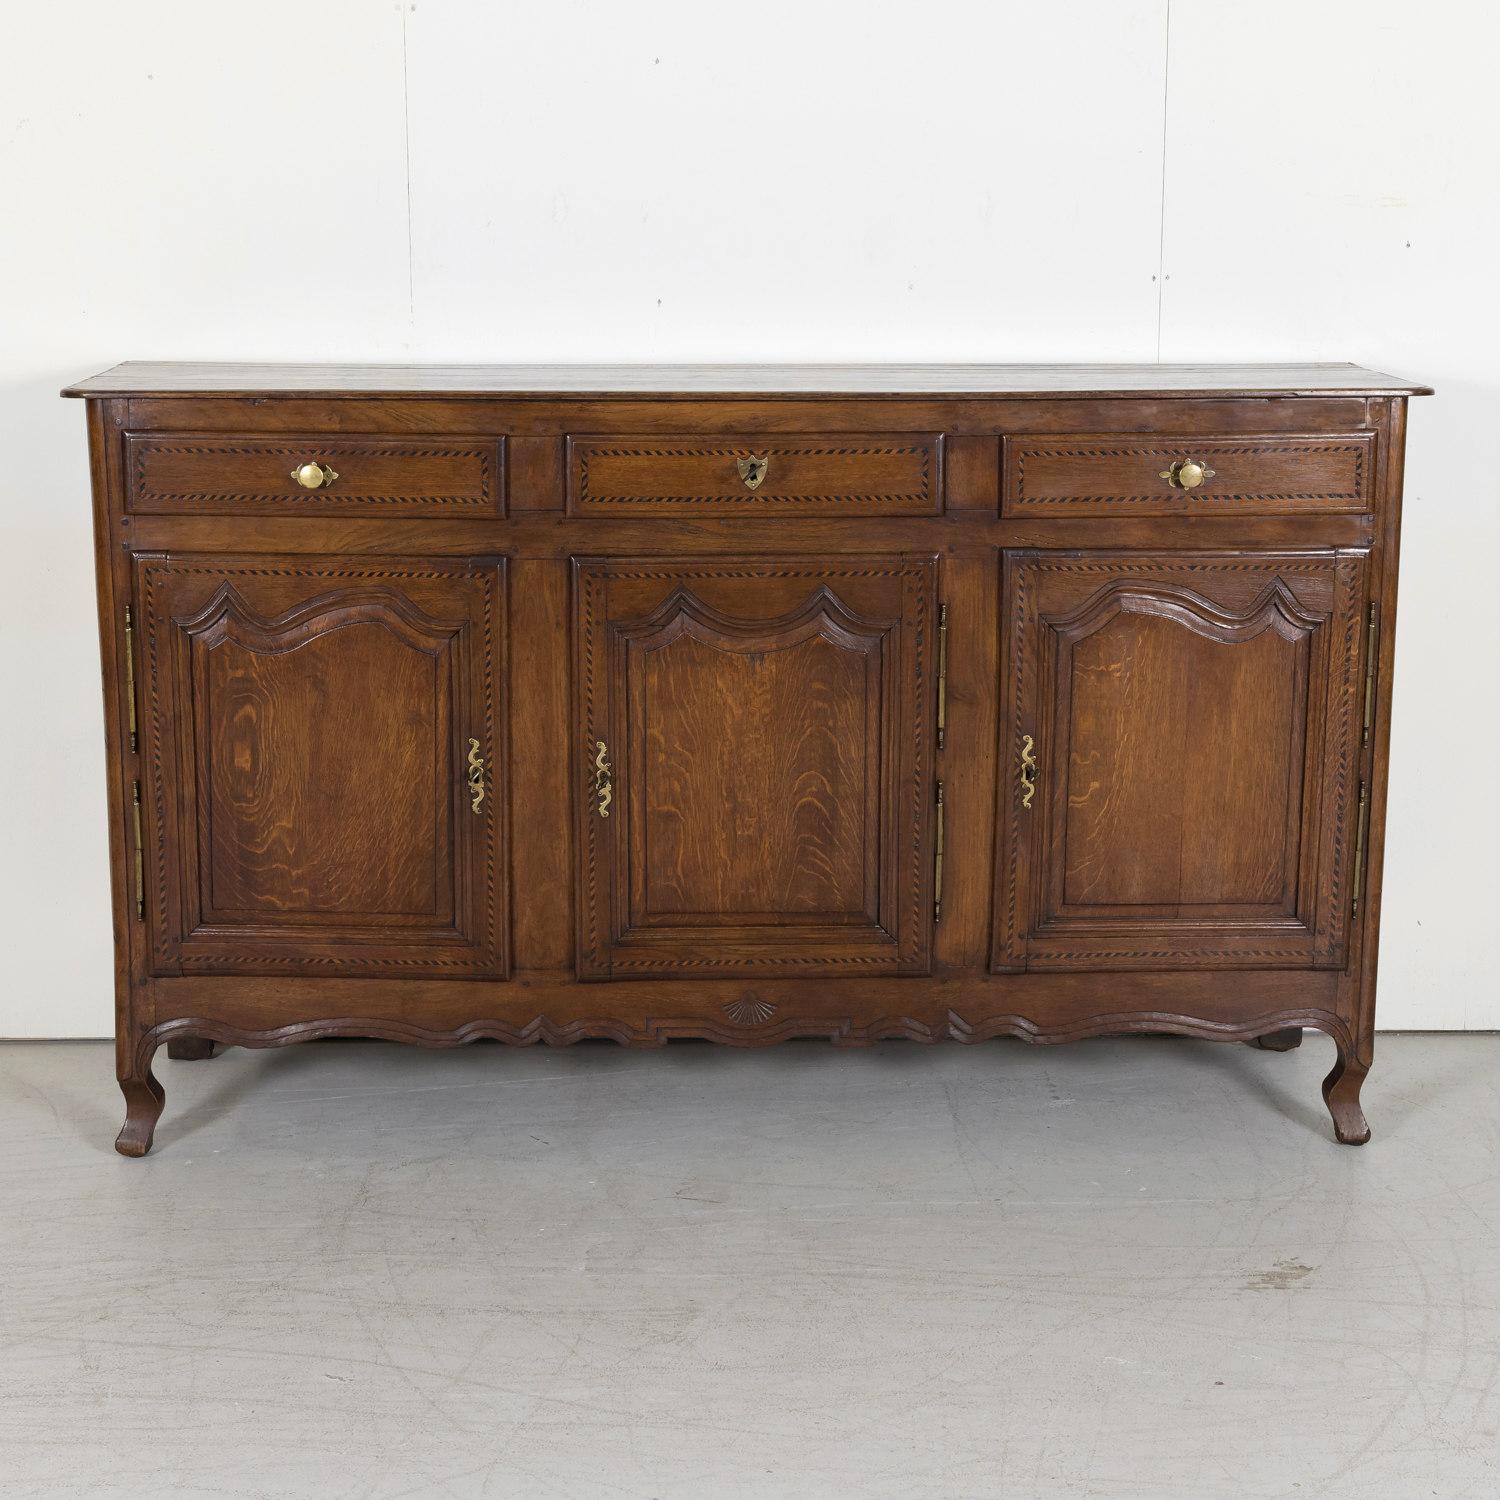 19th century French Country Louis XV style carved enfilade buffet handcrafted of old growth French oak and ebonized marquetry near Caen, a port city and capital of the department of Calvados in northern France's Normandy region, circa 1850s. This